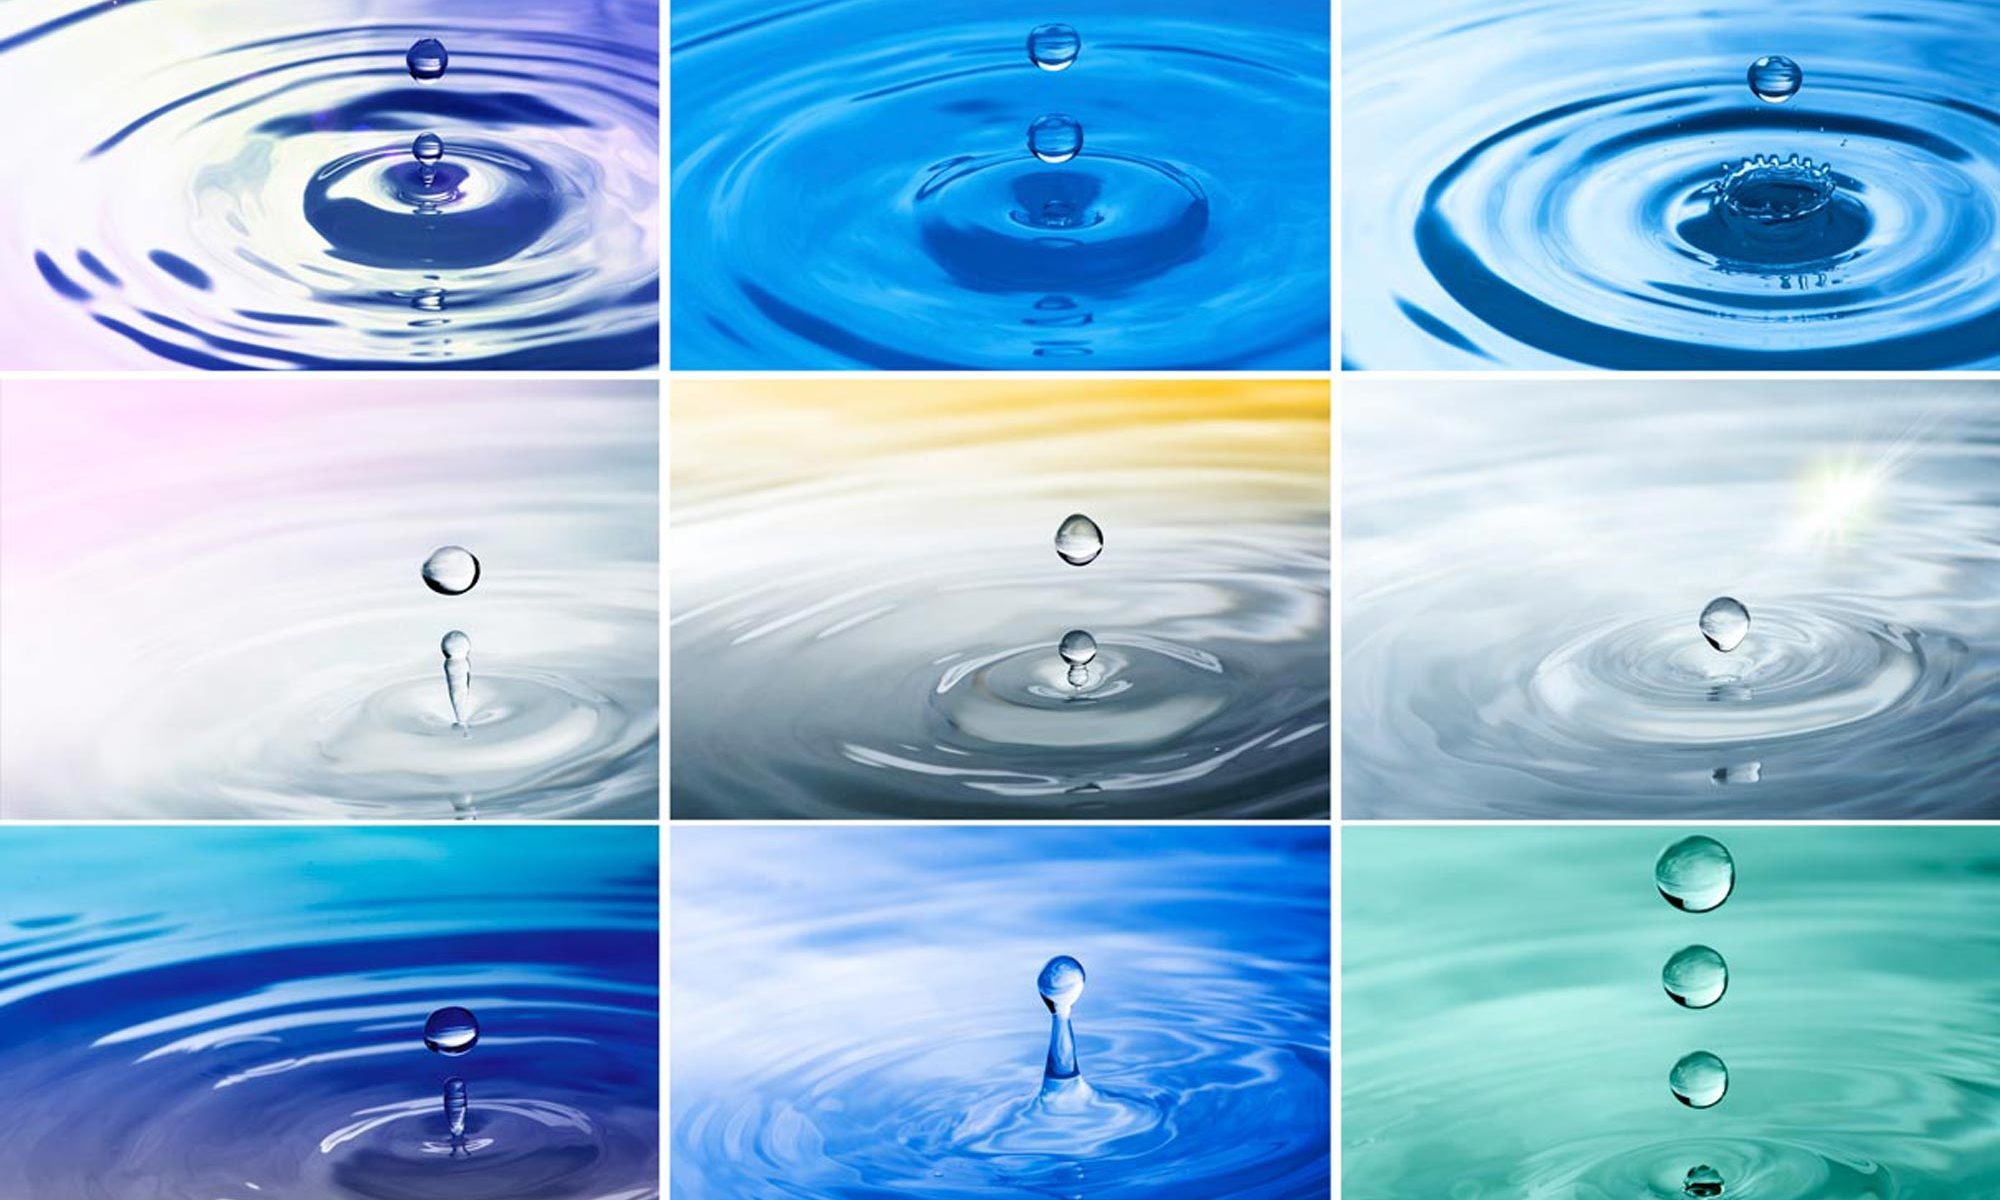 Water Drop Photography How To - Deines Photography